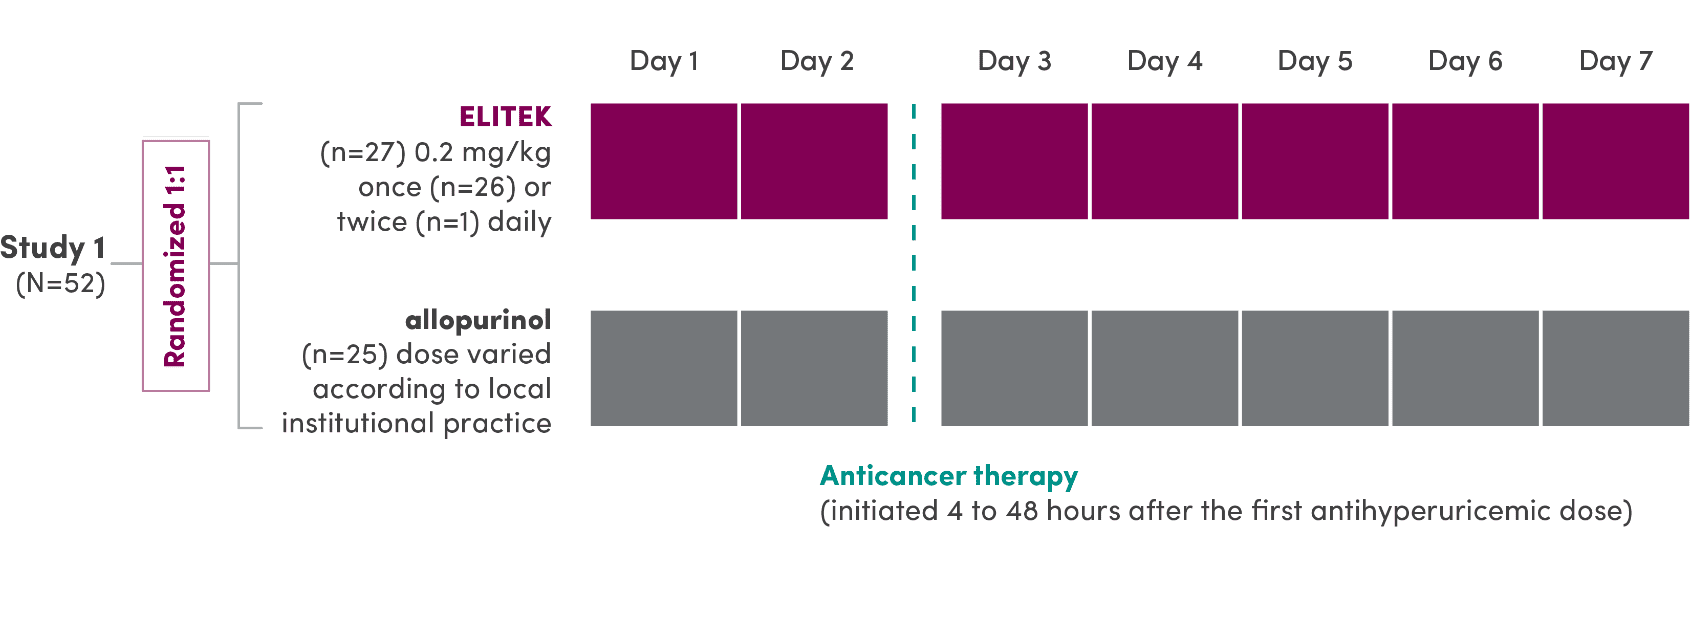 Study 1 (N=52): patients were randomized 1:1 and given either ELITEK (n=27), 0.2 mg/kg once (n=26) or twice (n=1) daily for 7 days, or allopurinol (n=25), dose varied according to local institutional practice for 7 days. Anticancer therapy was initiated 4 to 48 hours after the first antihyperuricemic dose.